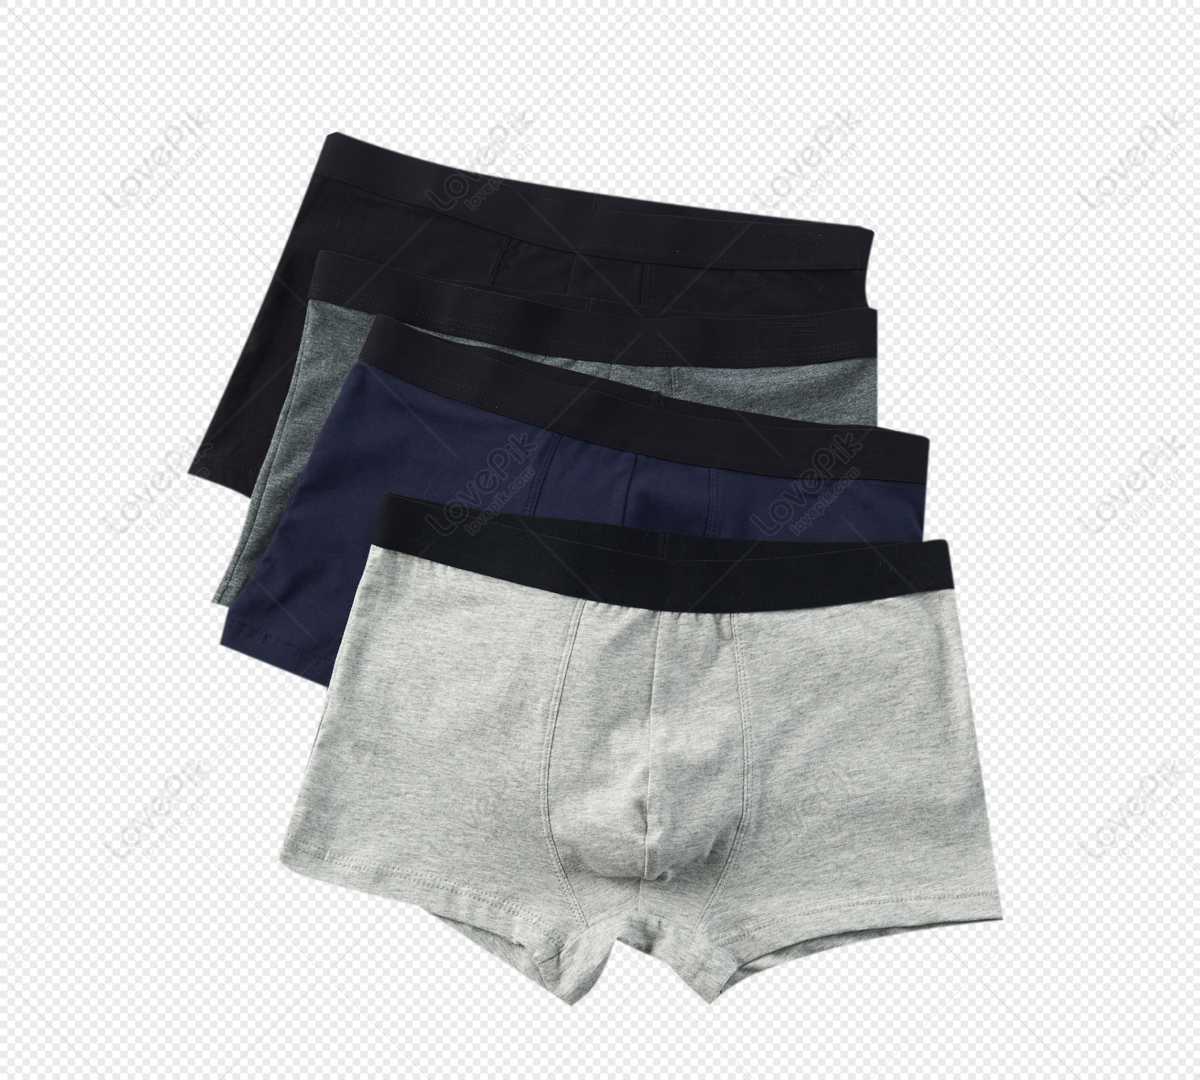 Boxer Briefs Isolated On A White Mens Scrotum Underclothing Photo  Background And Picture For Free Download - Pngtree